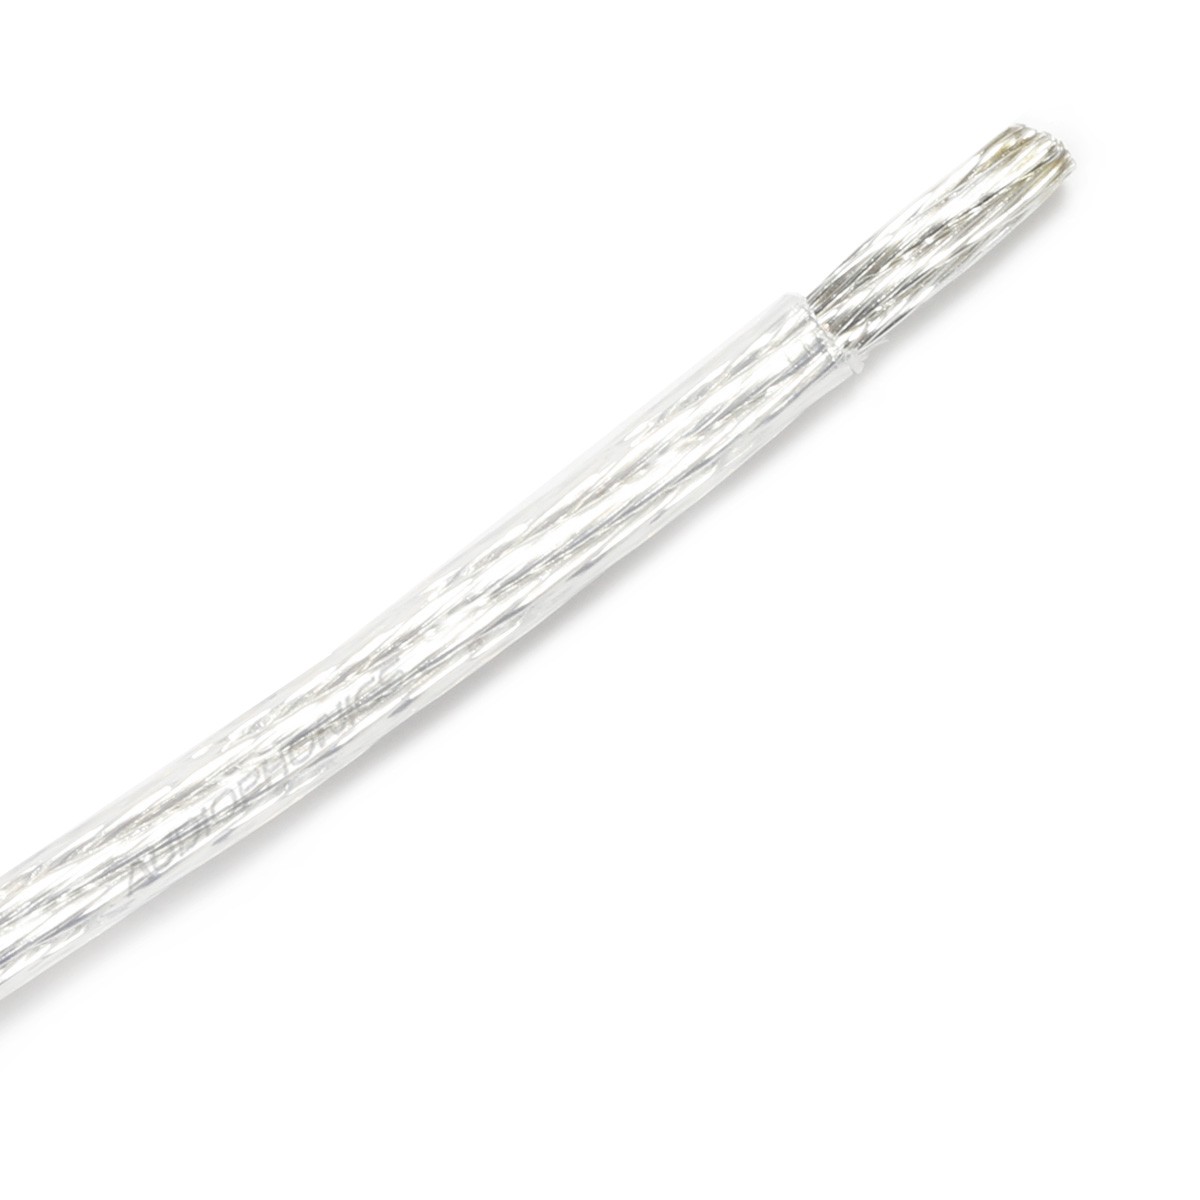 Copper / Silver Wiring Cable 4mm² PTFE Sleeve Ø3.6mm Transparent